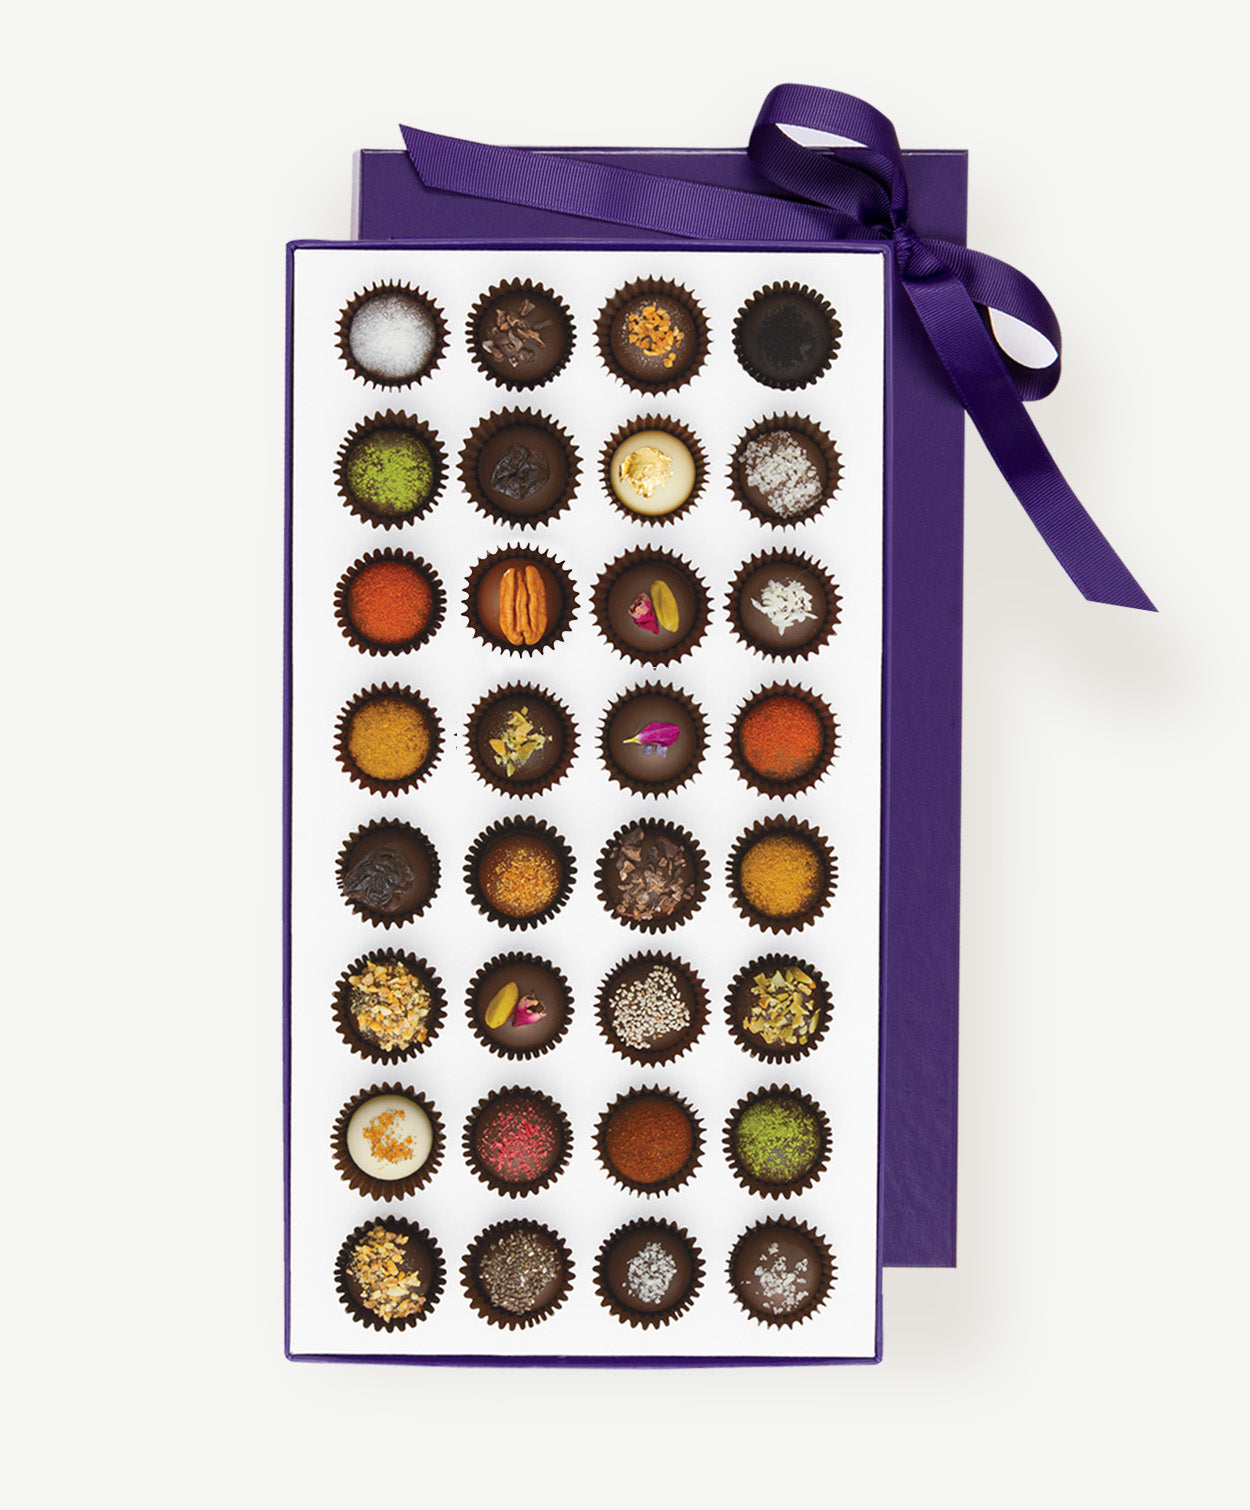 Large purple candy box of Vosges Haut-Chocolat sits open displaying thirty two chocolate truffles adorned with colorful spices, chopped nuts and dried flowers tied with a purple ribbon bow on a grey background.